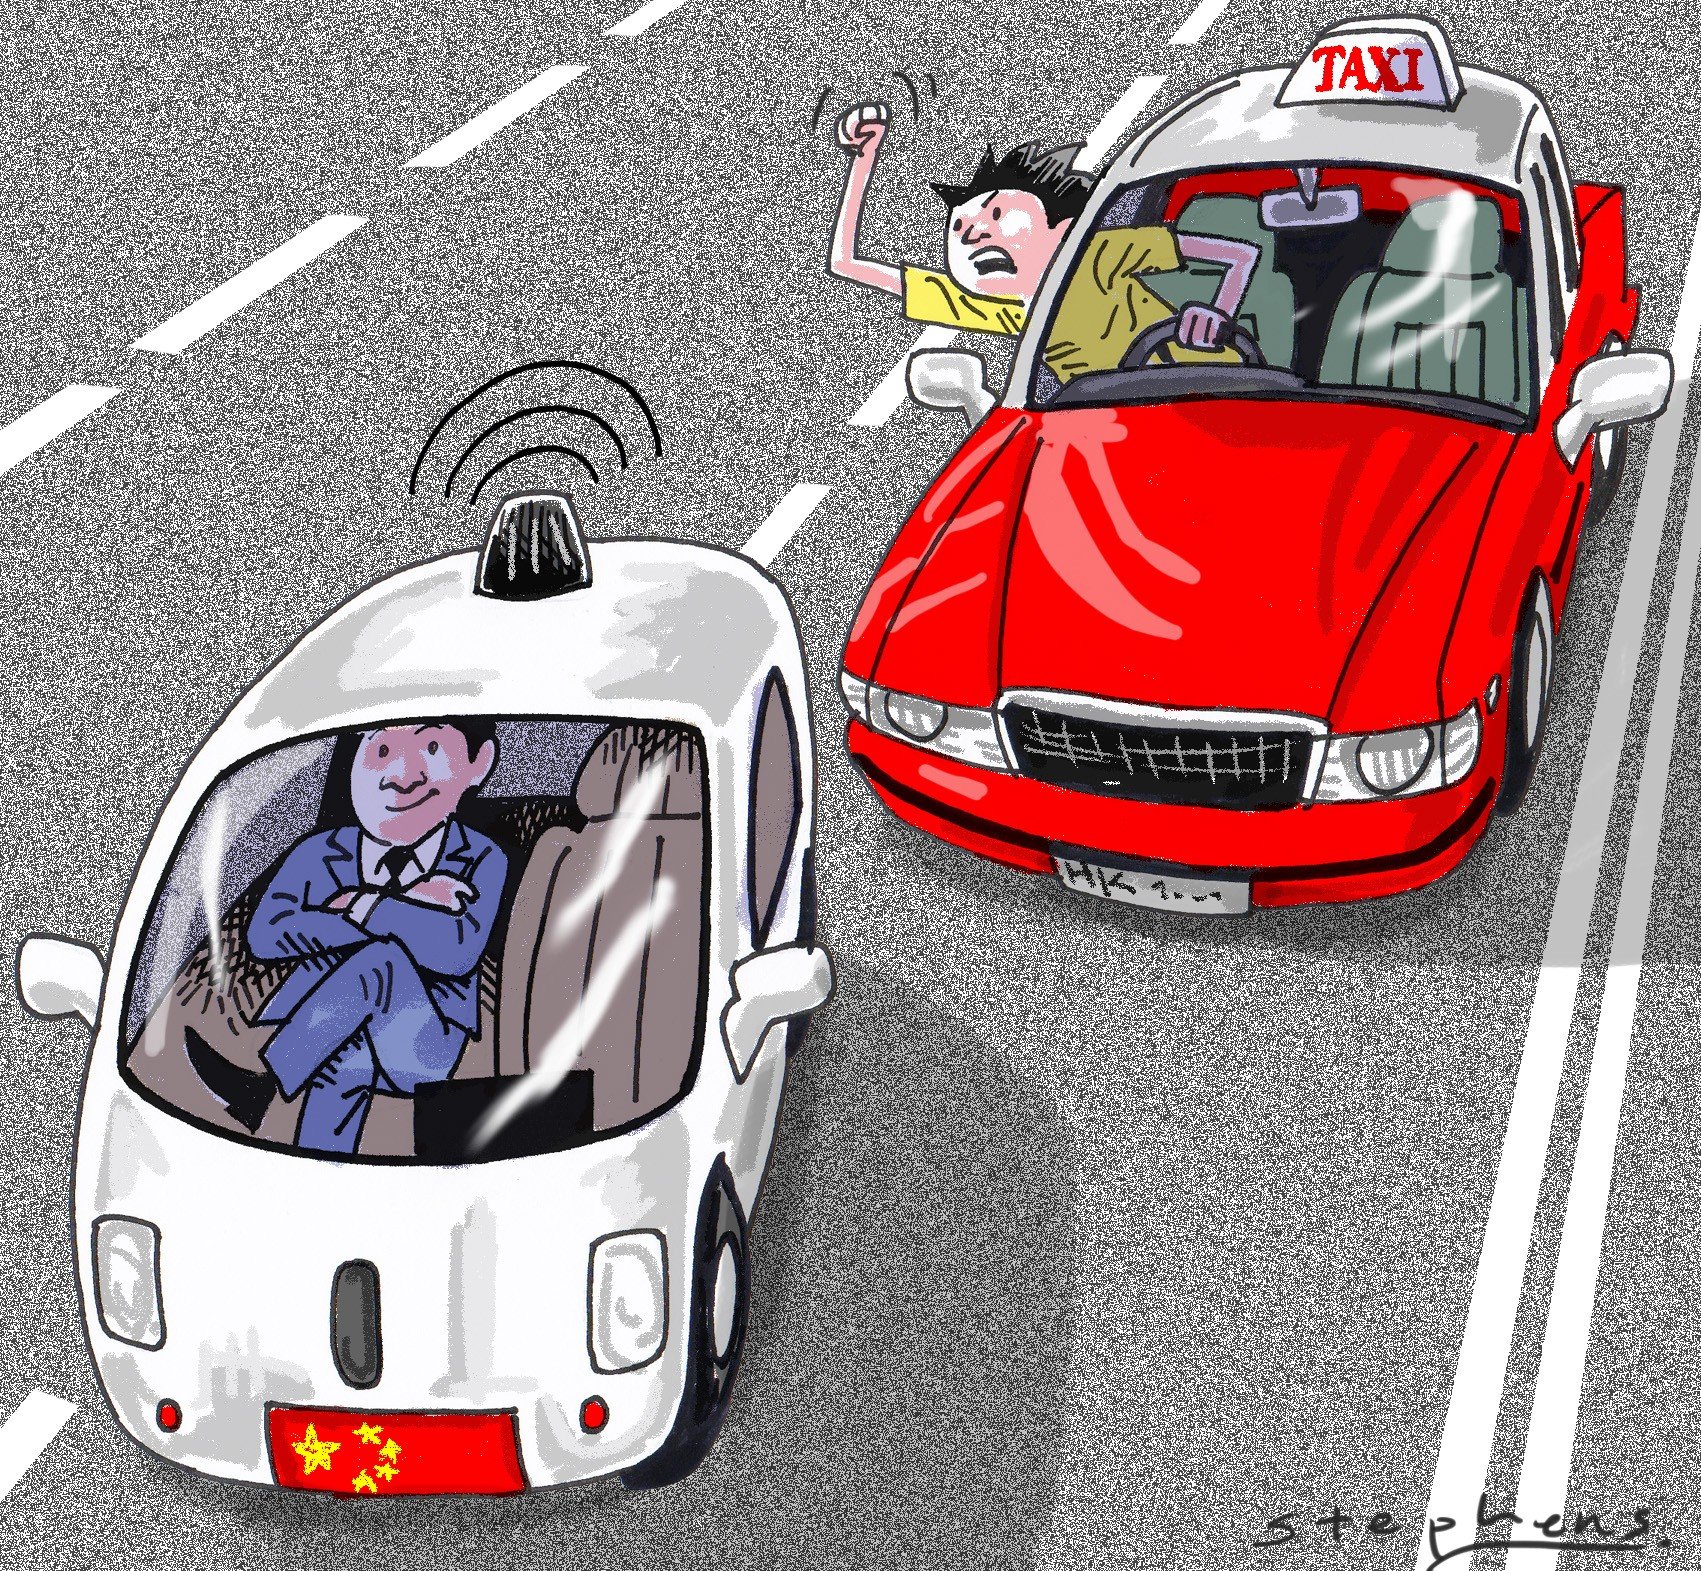 Wilson Wong says mainland China’s intensive investment and flexible workforce make it the ‘holy grail’ for autonomous cars, in contrast to Hong Kong, where concerns about job losses dominate thinking